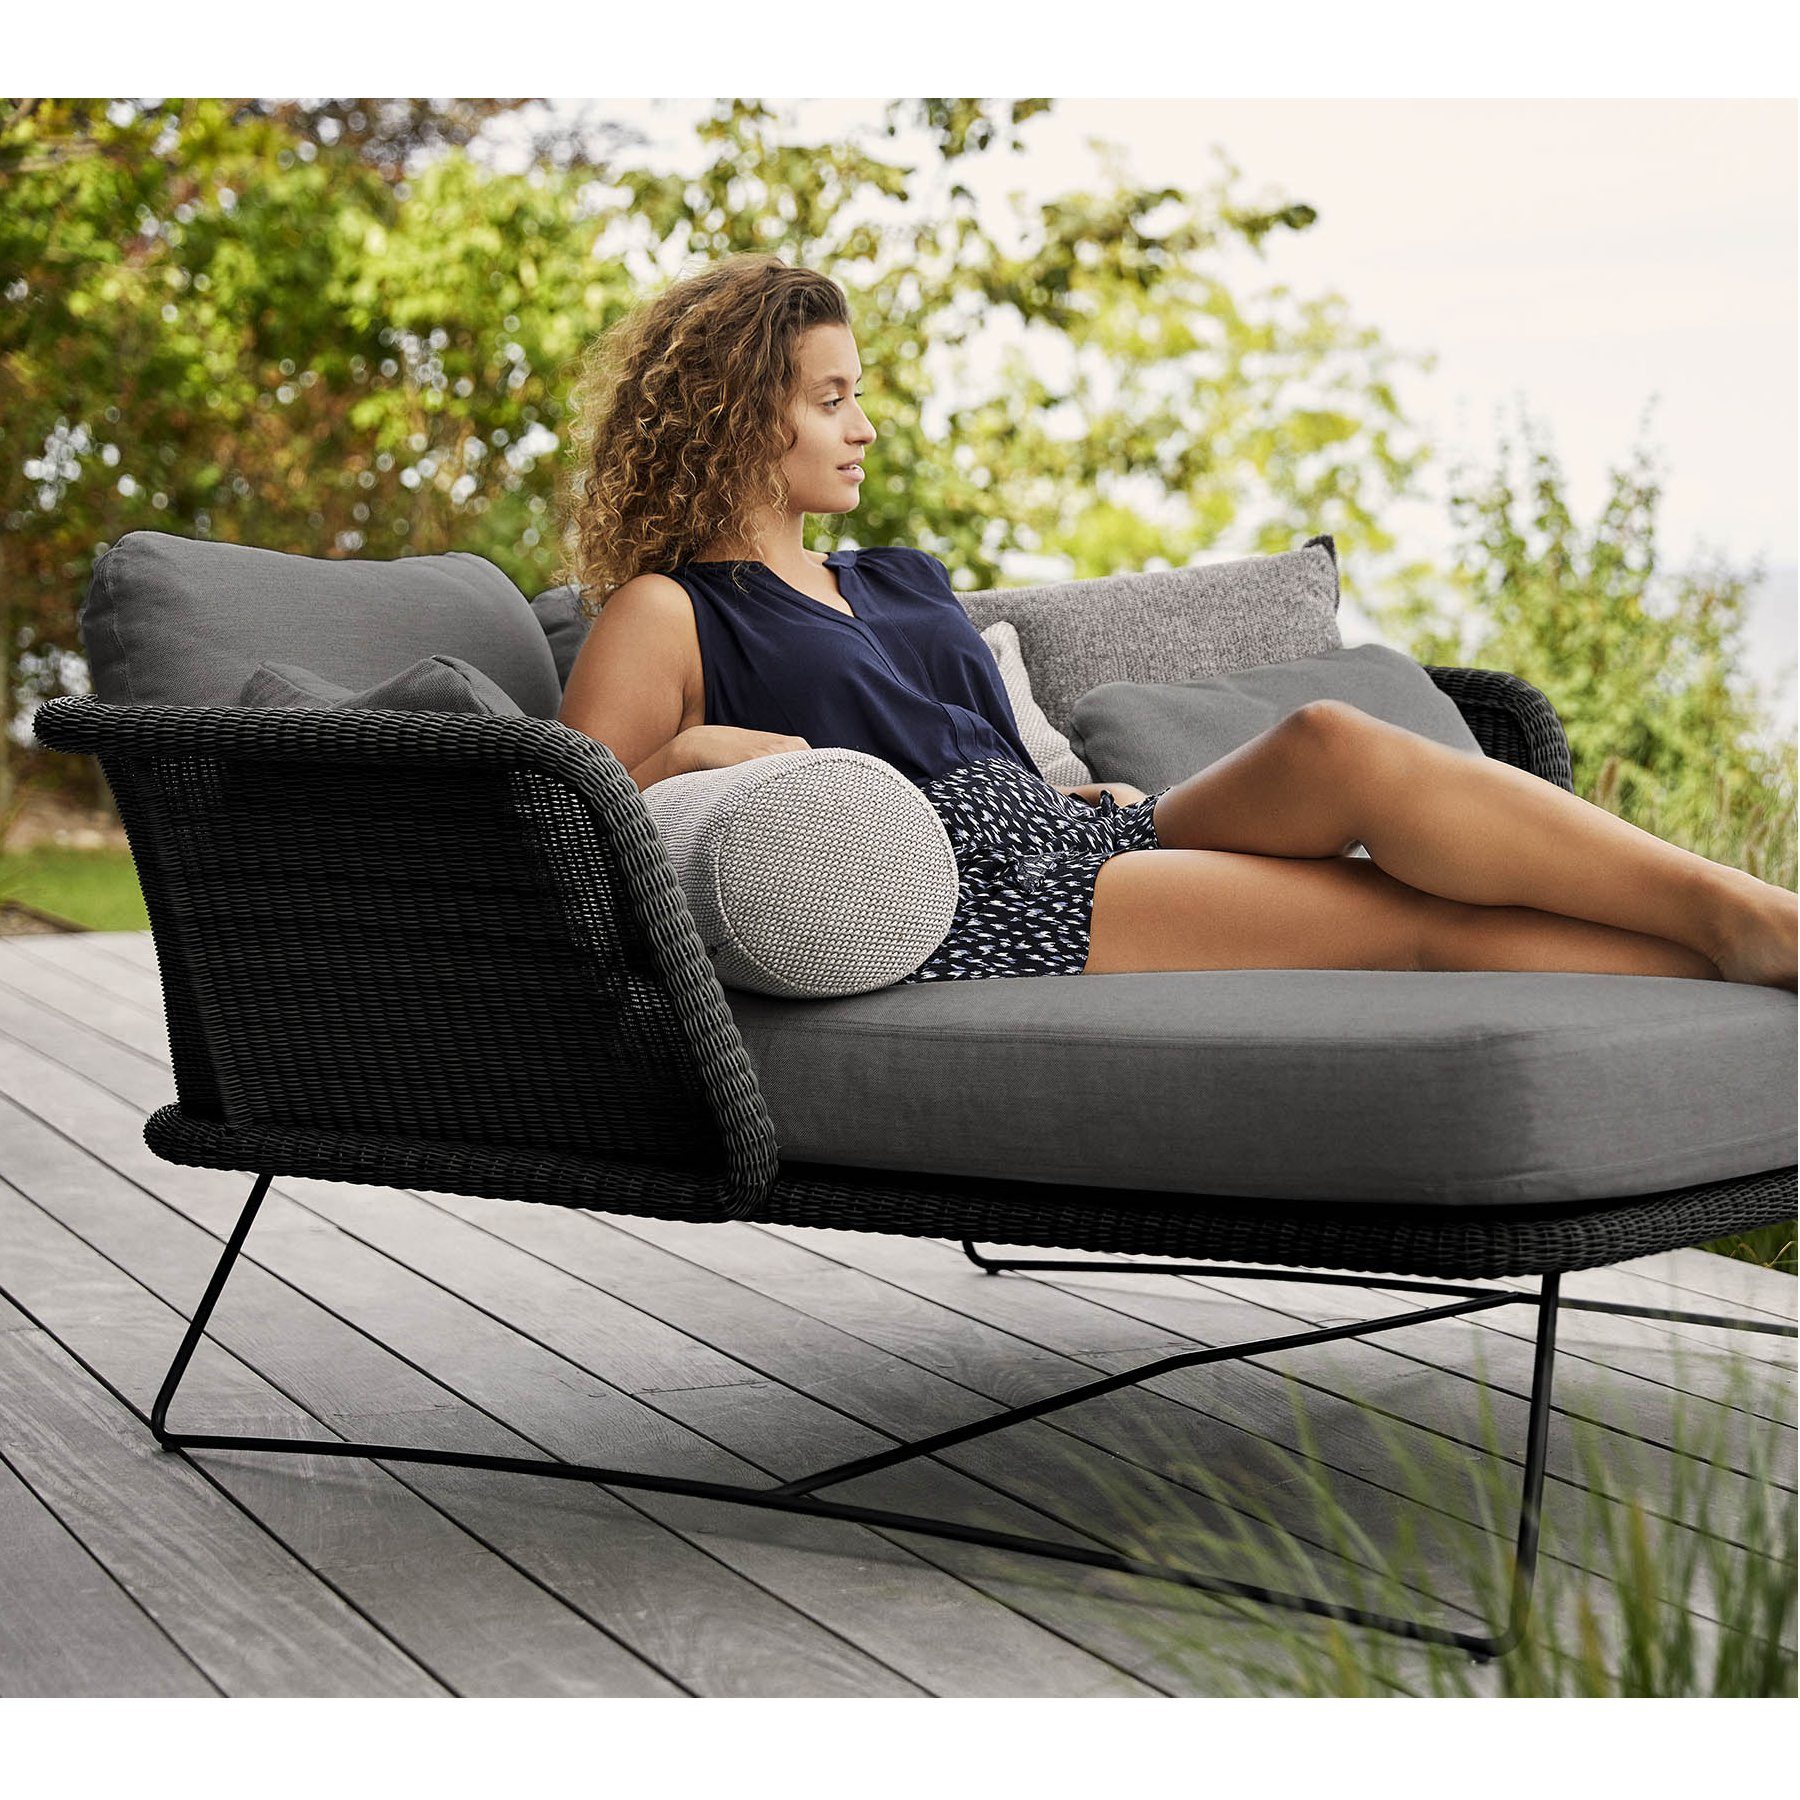 Cane line Horizon Daybed